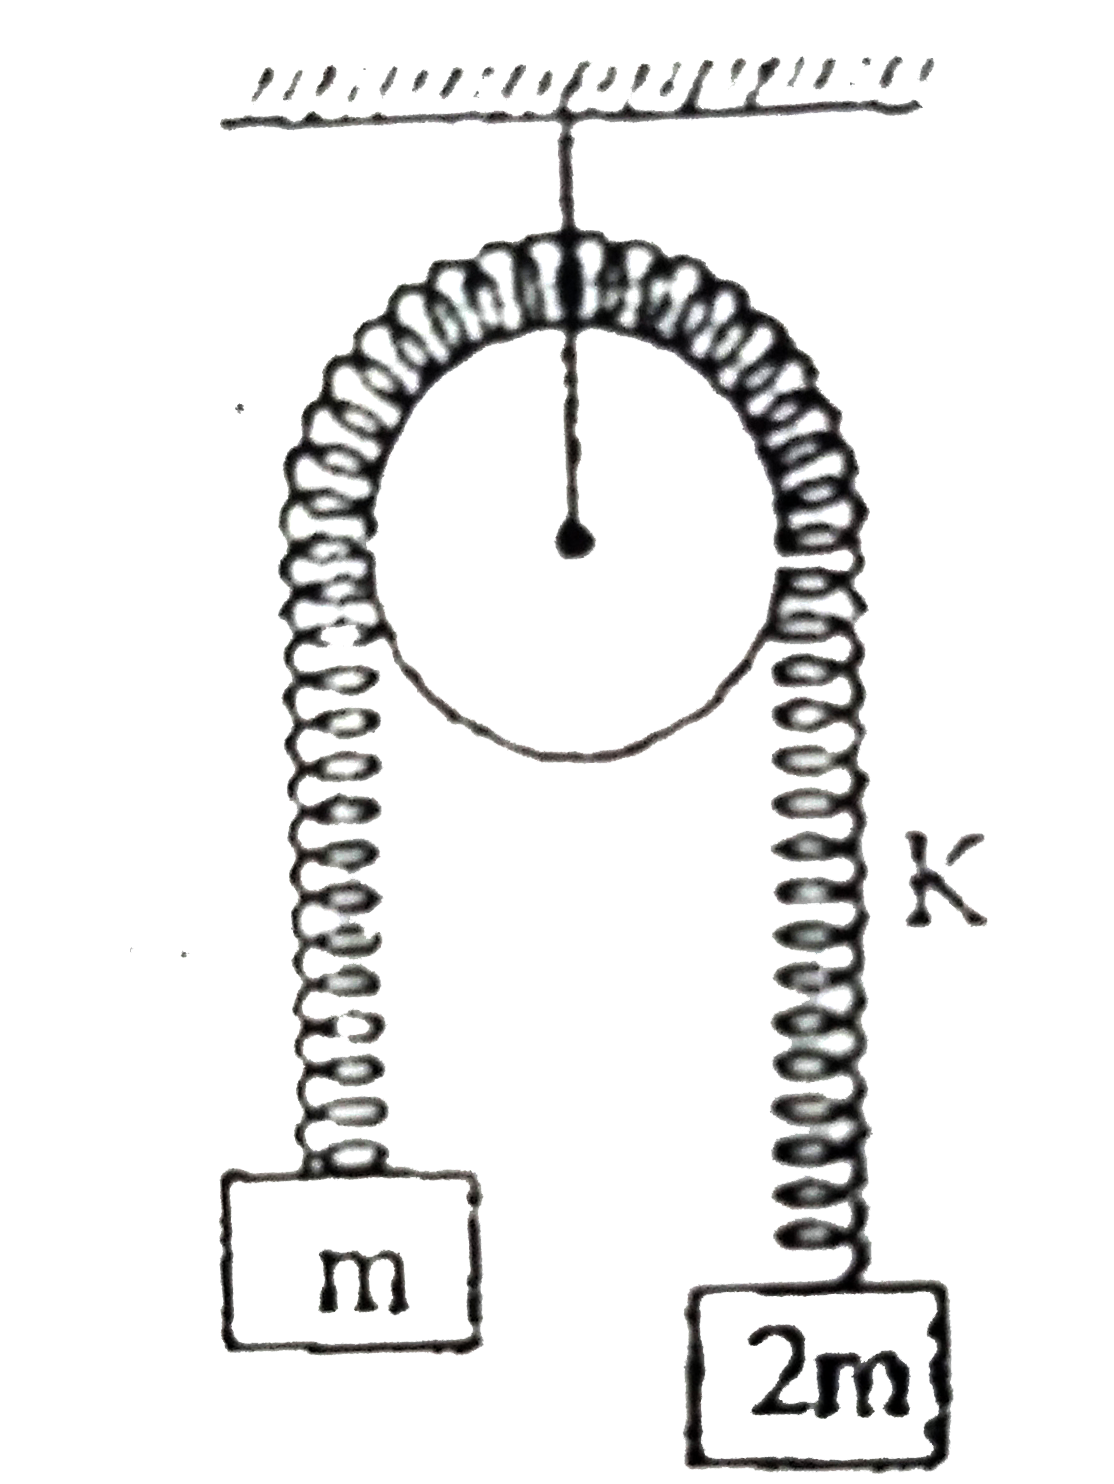 Two blocks of mass m and 2m are connected to a spring and wrapped around a smooth pulley as shown in the figure. Blocks  are released together with spring in natural length. Calculate the maximum elongation (in meter) of the spring. Given (mg)/(K)=3 meter.